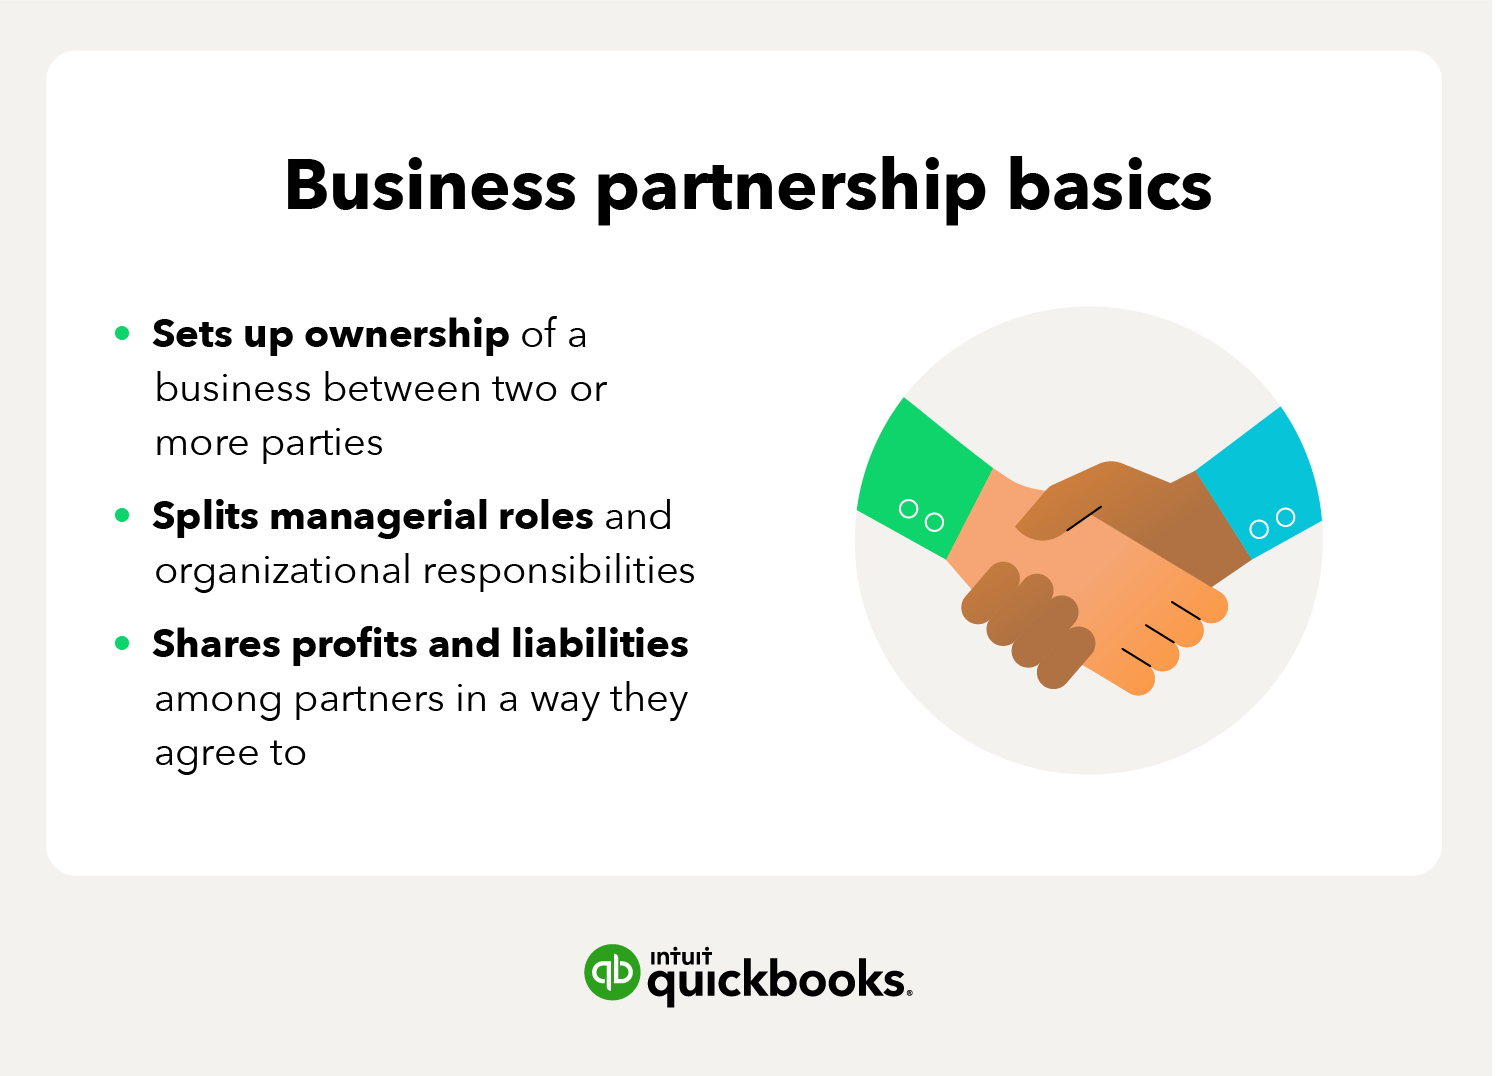 Image explaining the basics of a business partnership: It sets up ownership of the business between two or more parties, it splits managerial roles and organizational responsibilities, and it splits profits and liabilities among partners in a way they agree to.